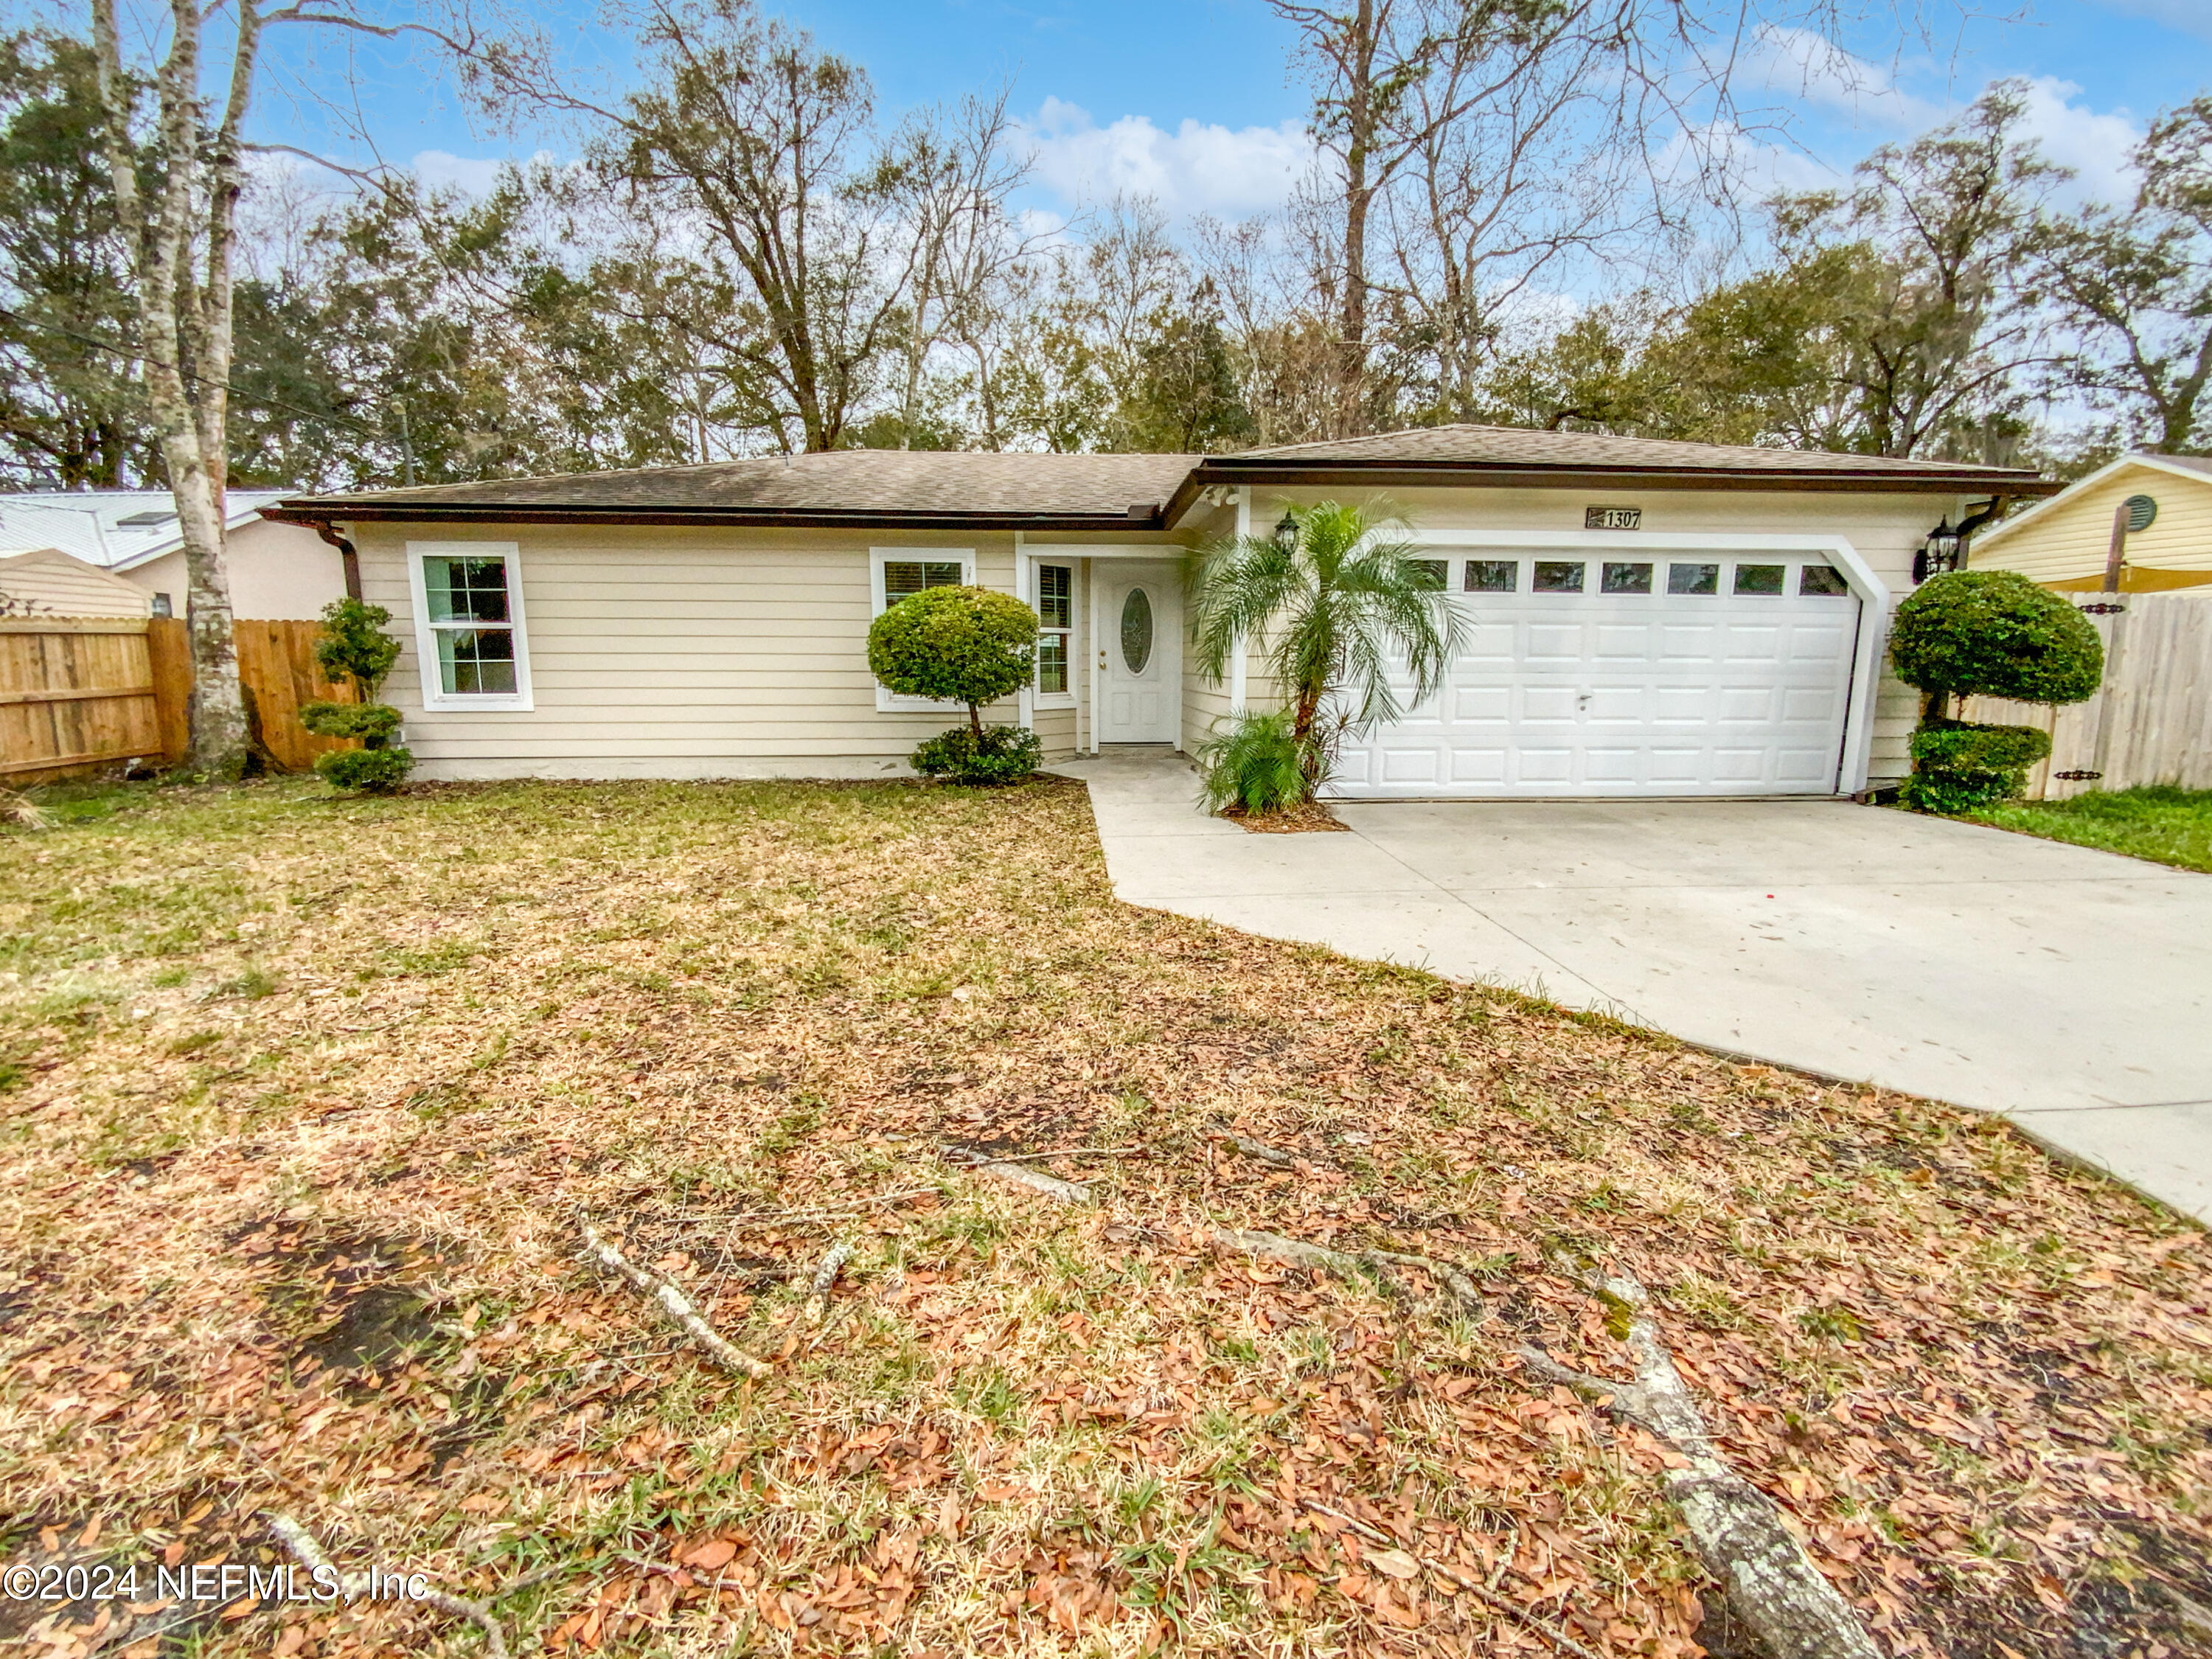 St Augustine, FL home for sale located at 1307 EISENHOWER Drive, St Augustine, FL 32084